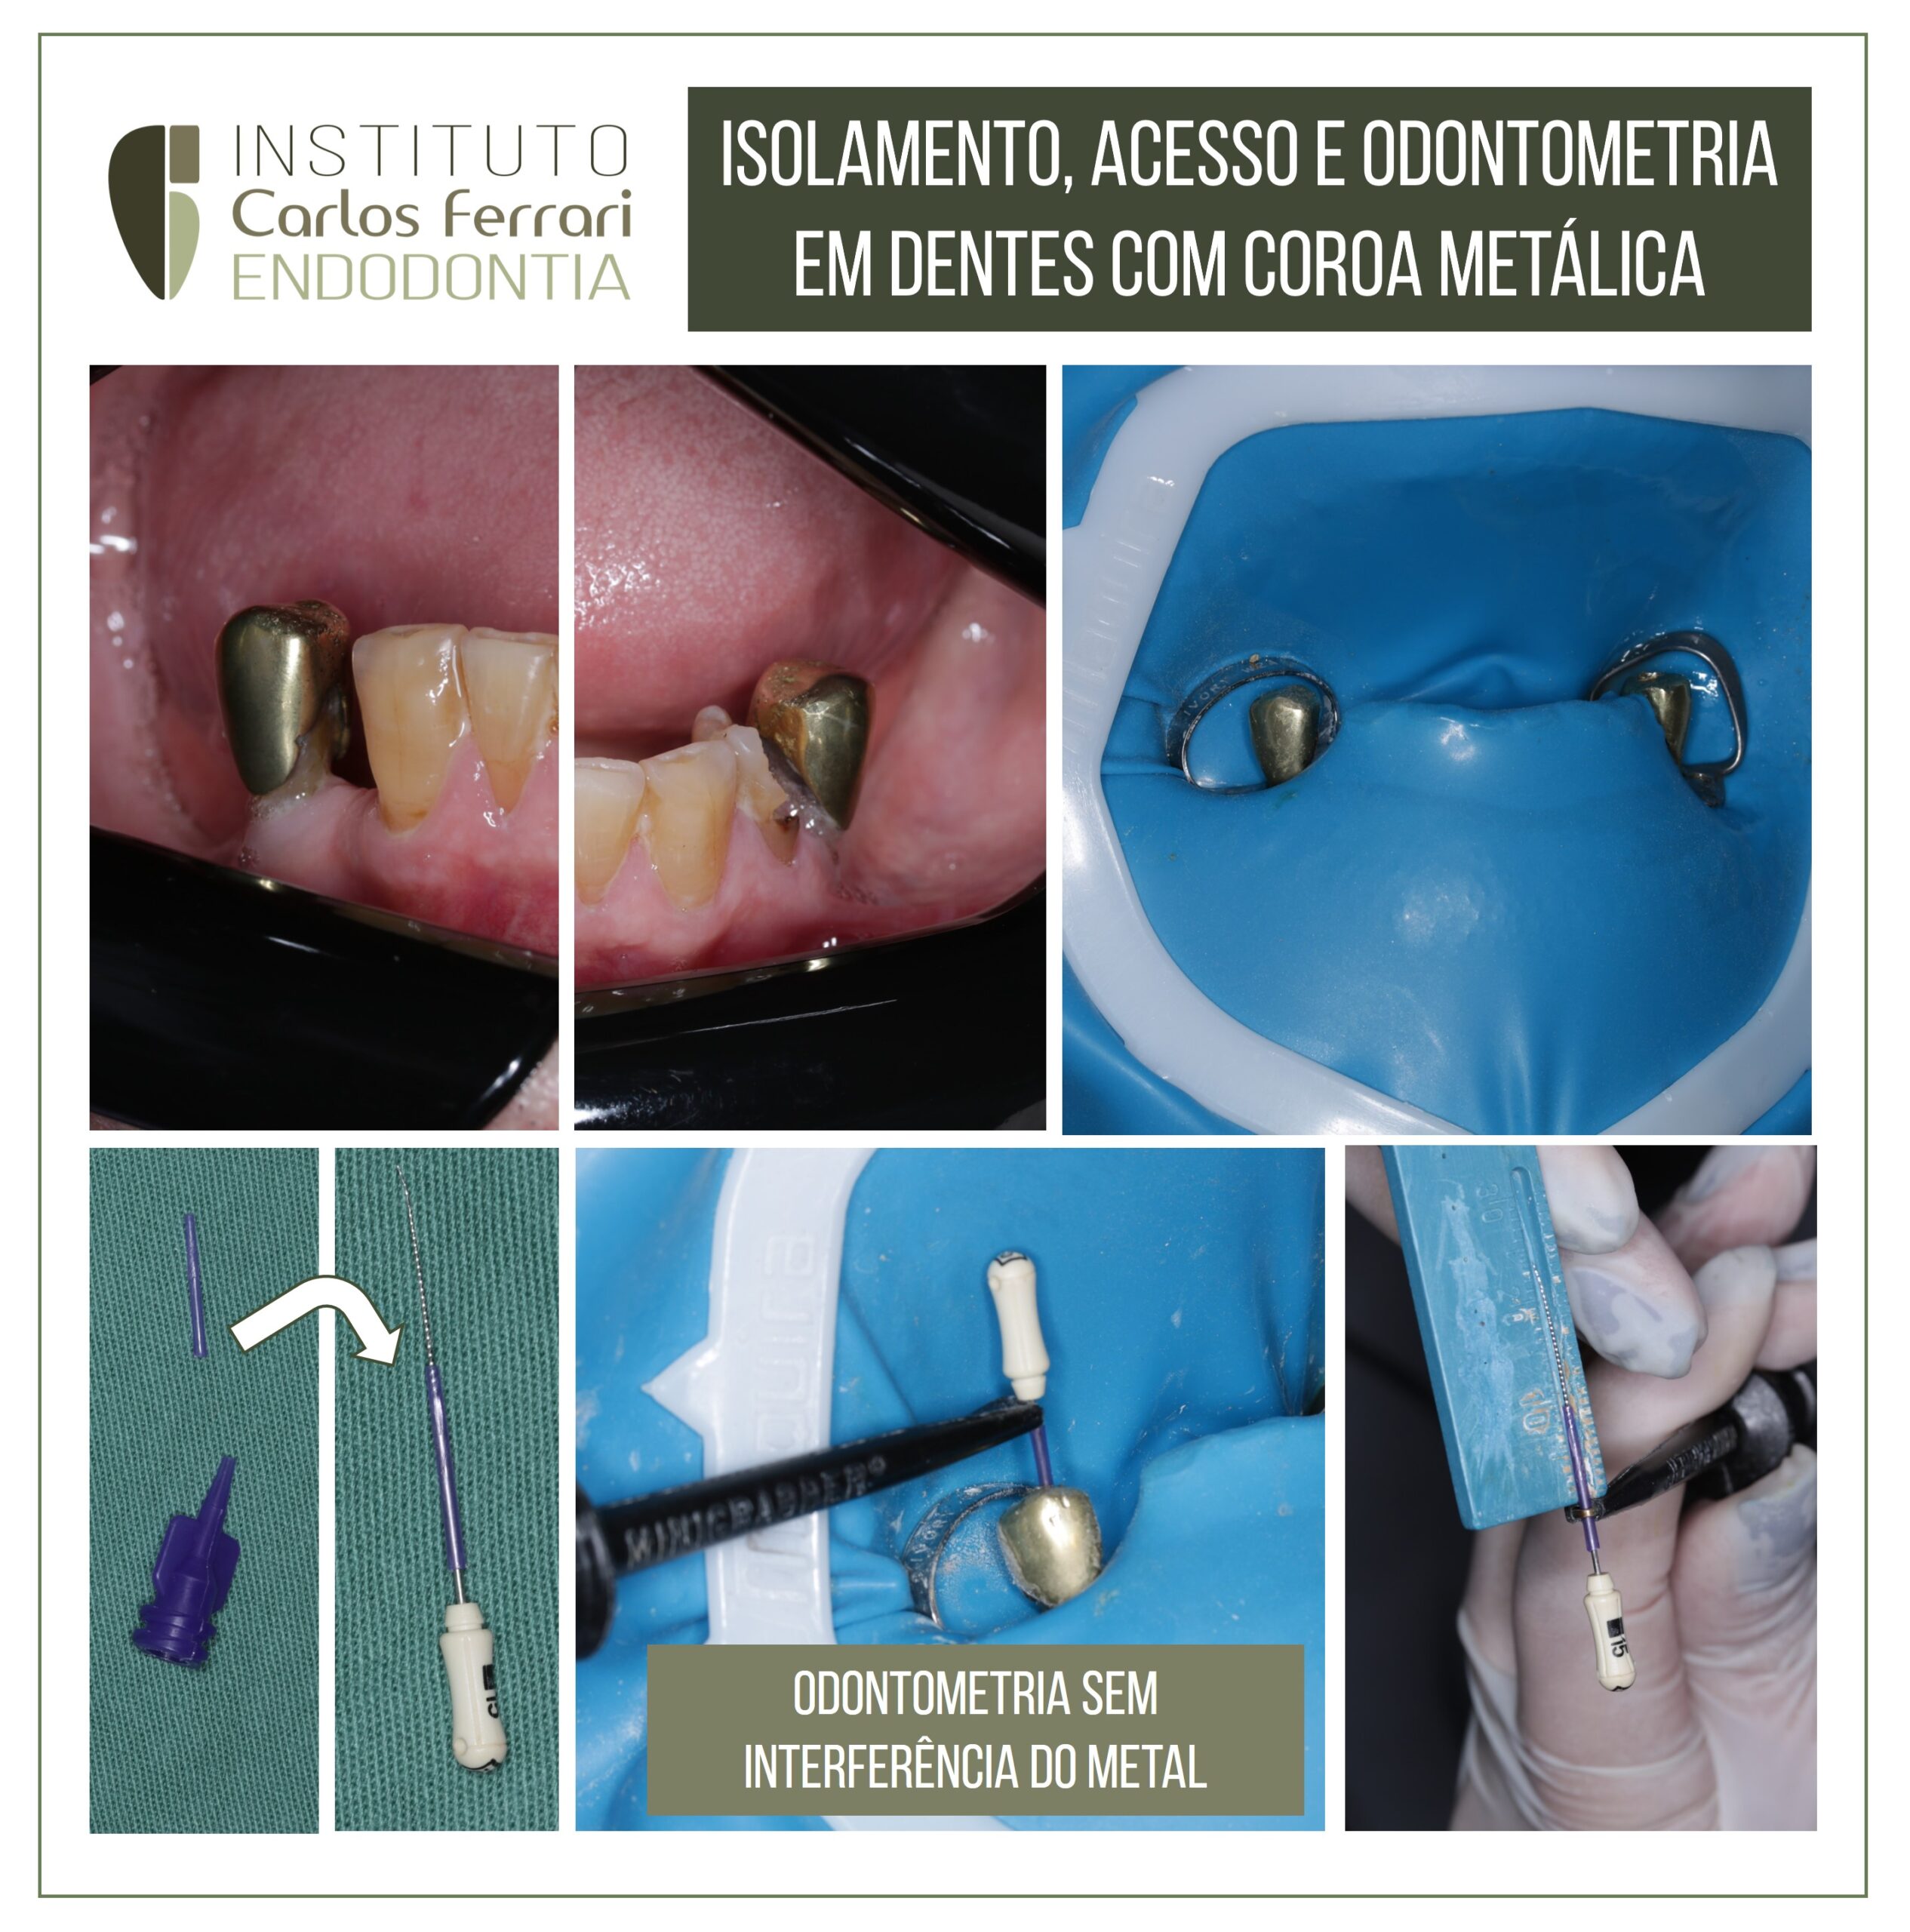 You are currently viewing Endodontics in a prosthetic crown. Adaptation for odontometry.